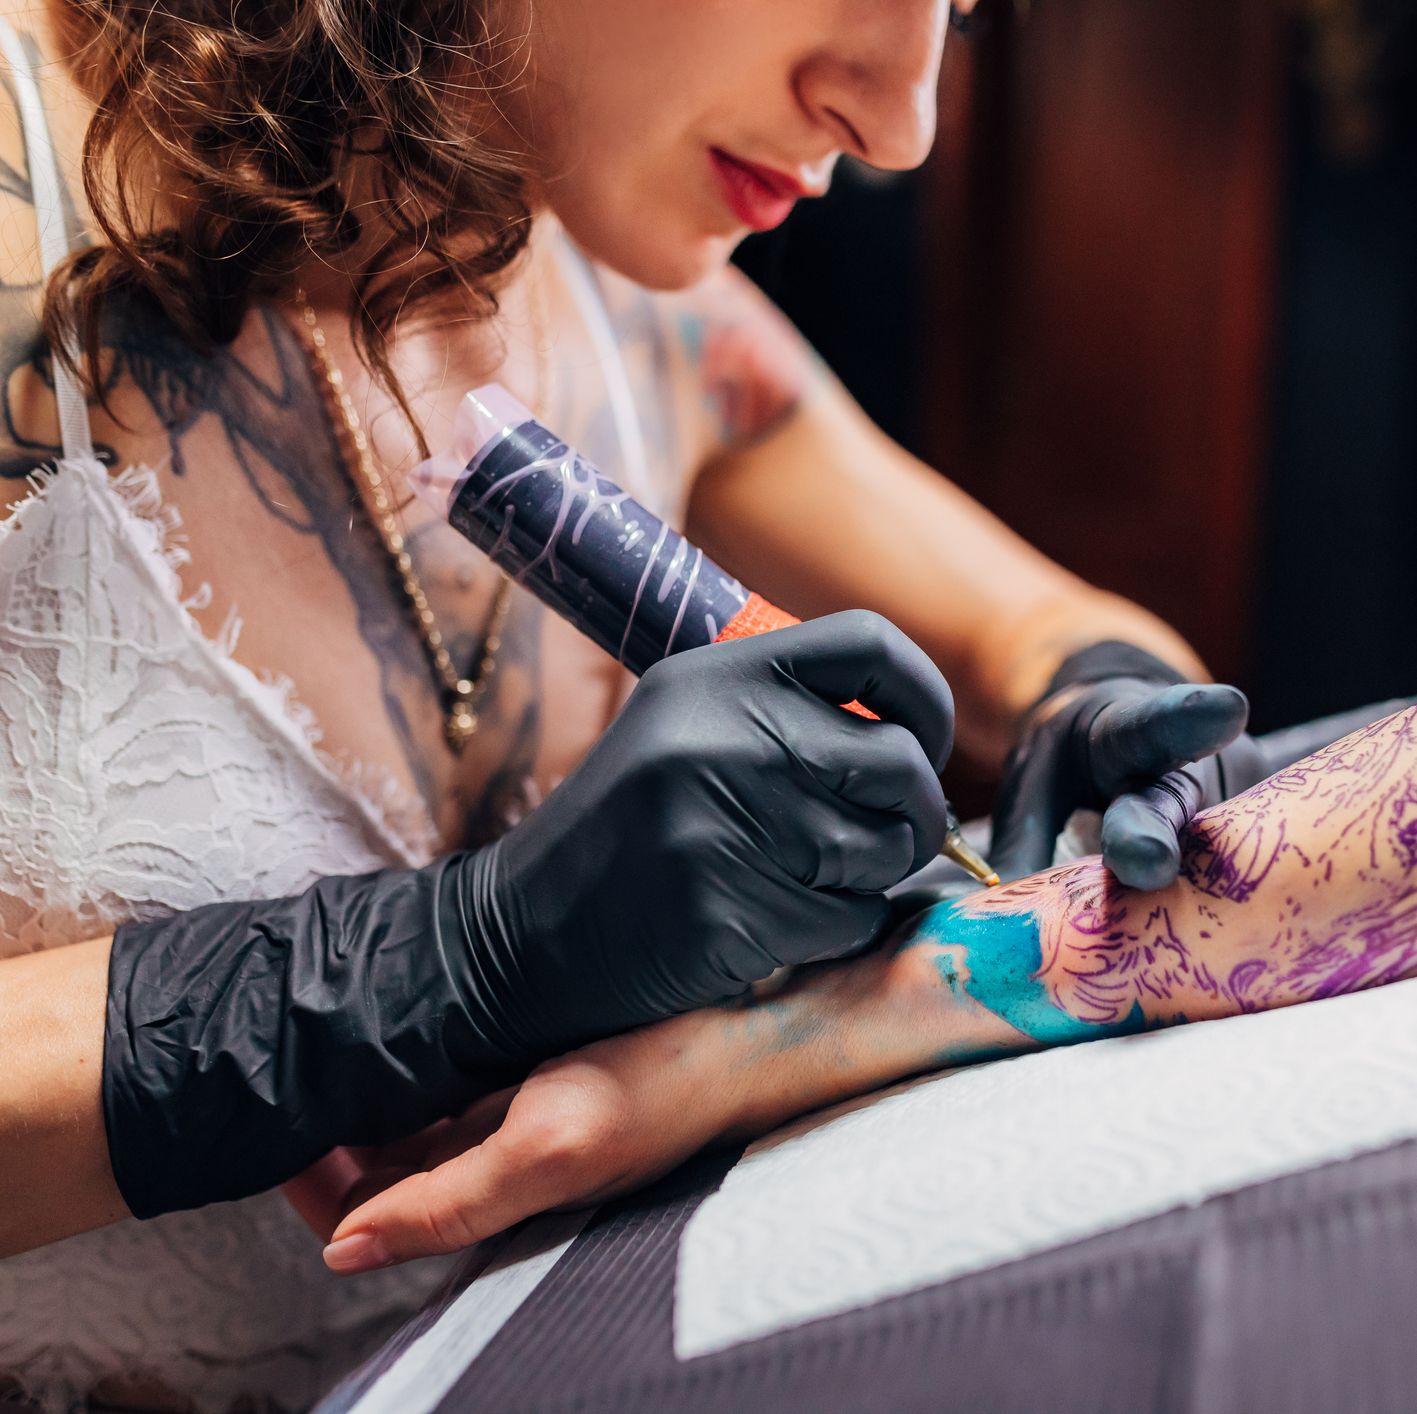 tattoo artist wearing black latex gloves tattooing colourful tattoo on woman's visible outstretched arm